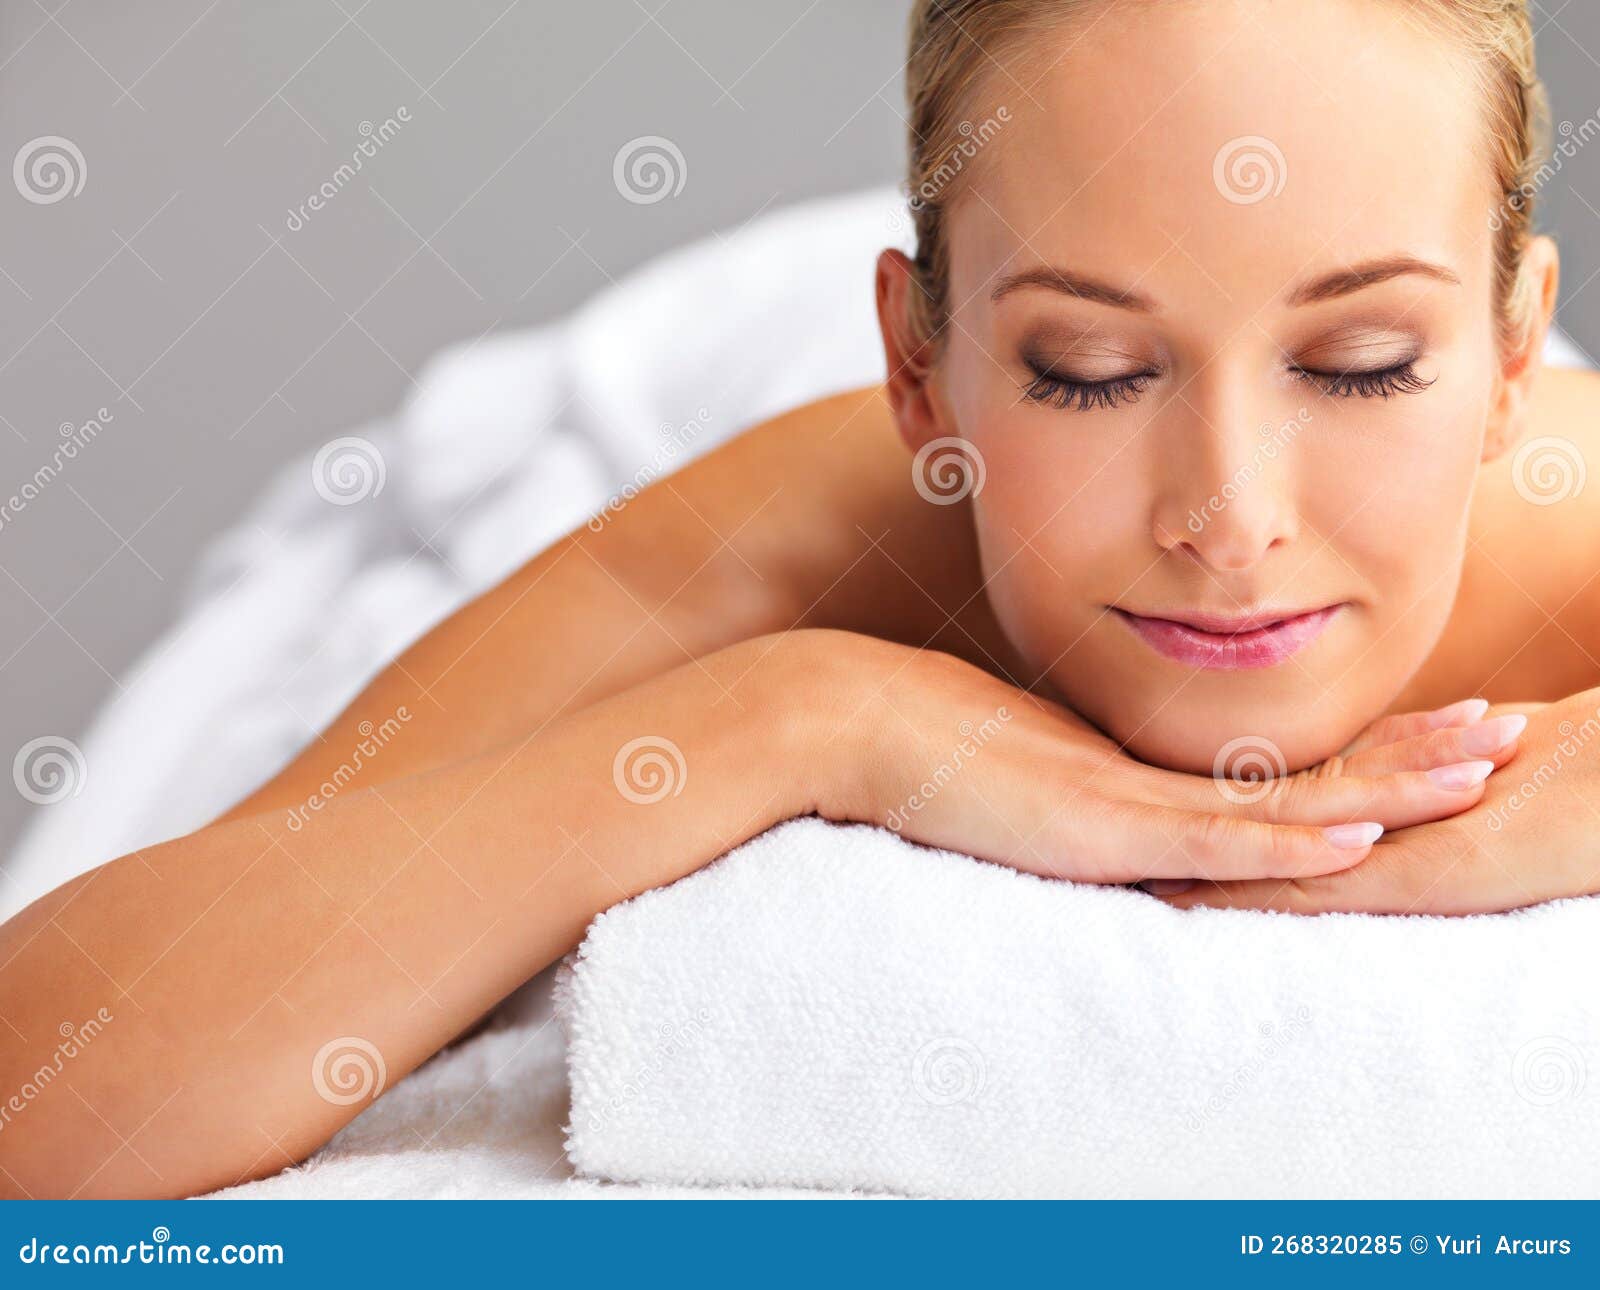 Feeling Completely Relaxed A Beautiful Young Woman Relaxing In A Spa Stock Image Image Of